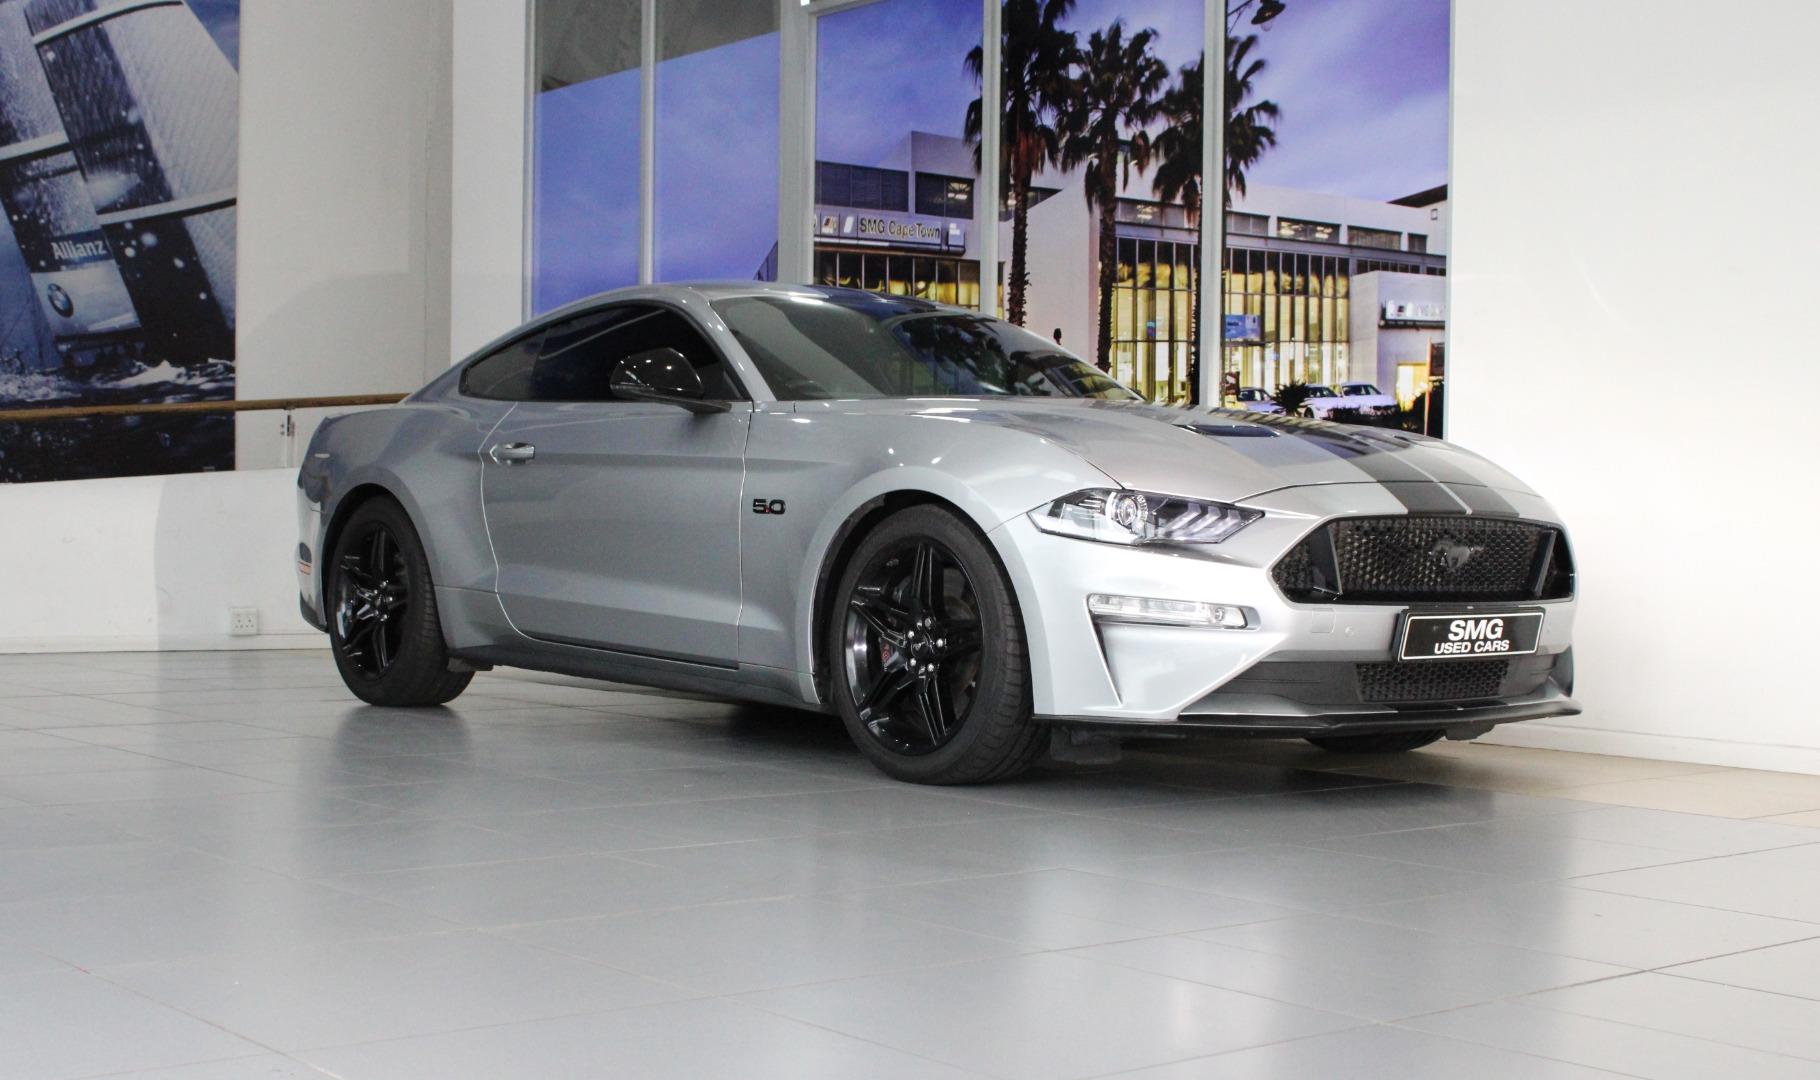 2020 Ford Mustang 5.0 GT Fastback  for sale - SMG12|USED|115406